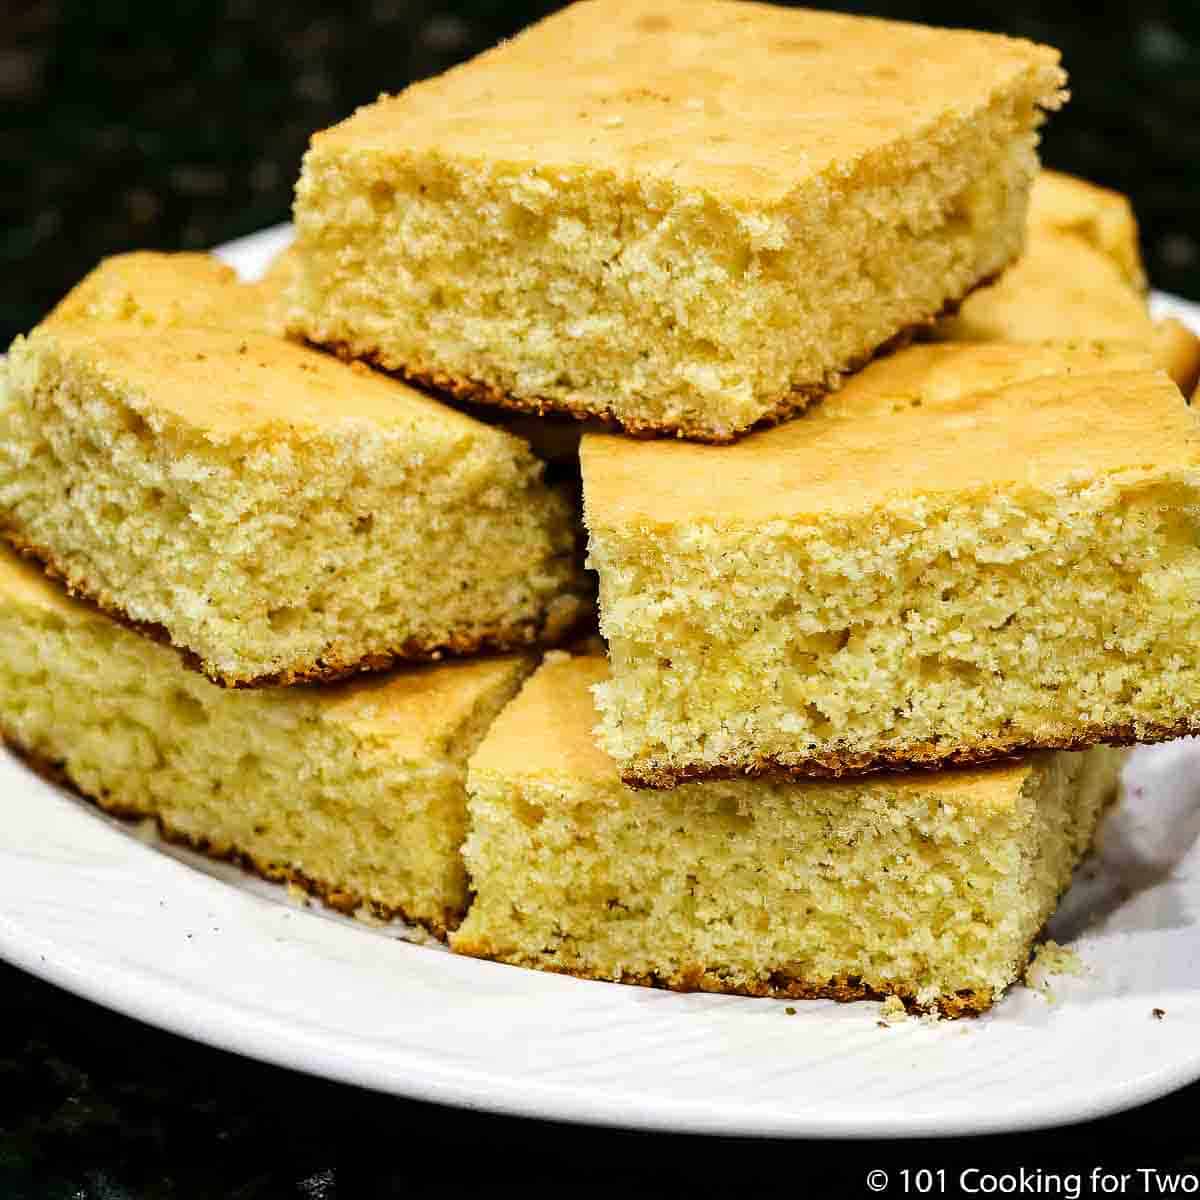 https://www.101cookingfortwo.com/wp-content/uploads/2023/09/pile-of-cornbread-on-a-plate-2.jpg